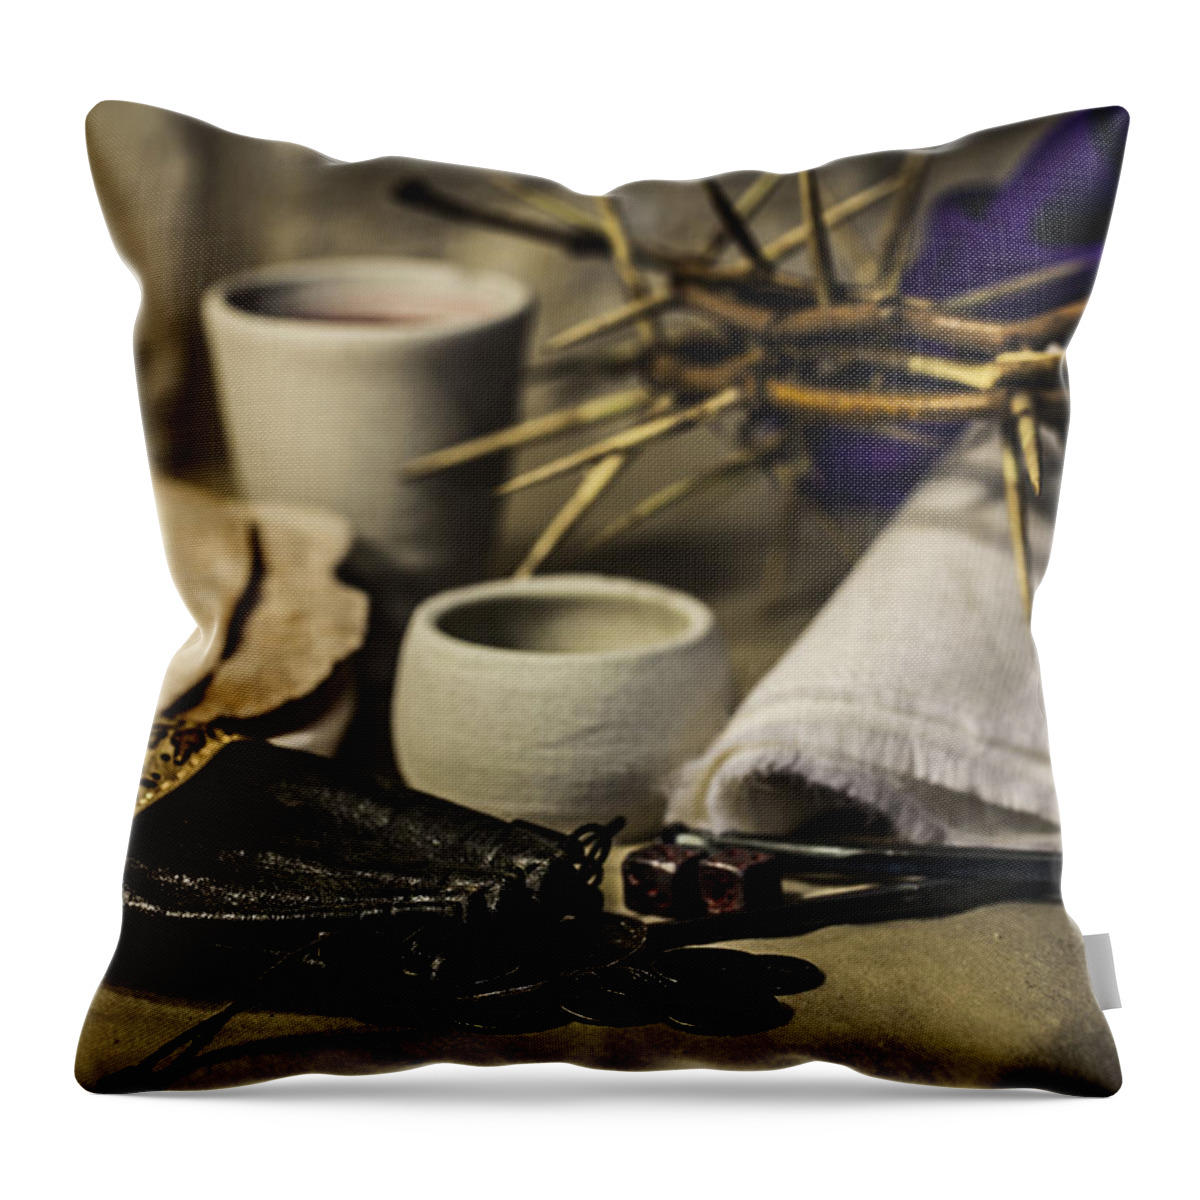 Christianity Throw Pillow featuring the photograph Christ's Final Supper And What it Cost by Amber Kresge